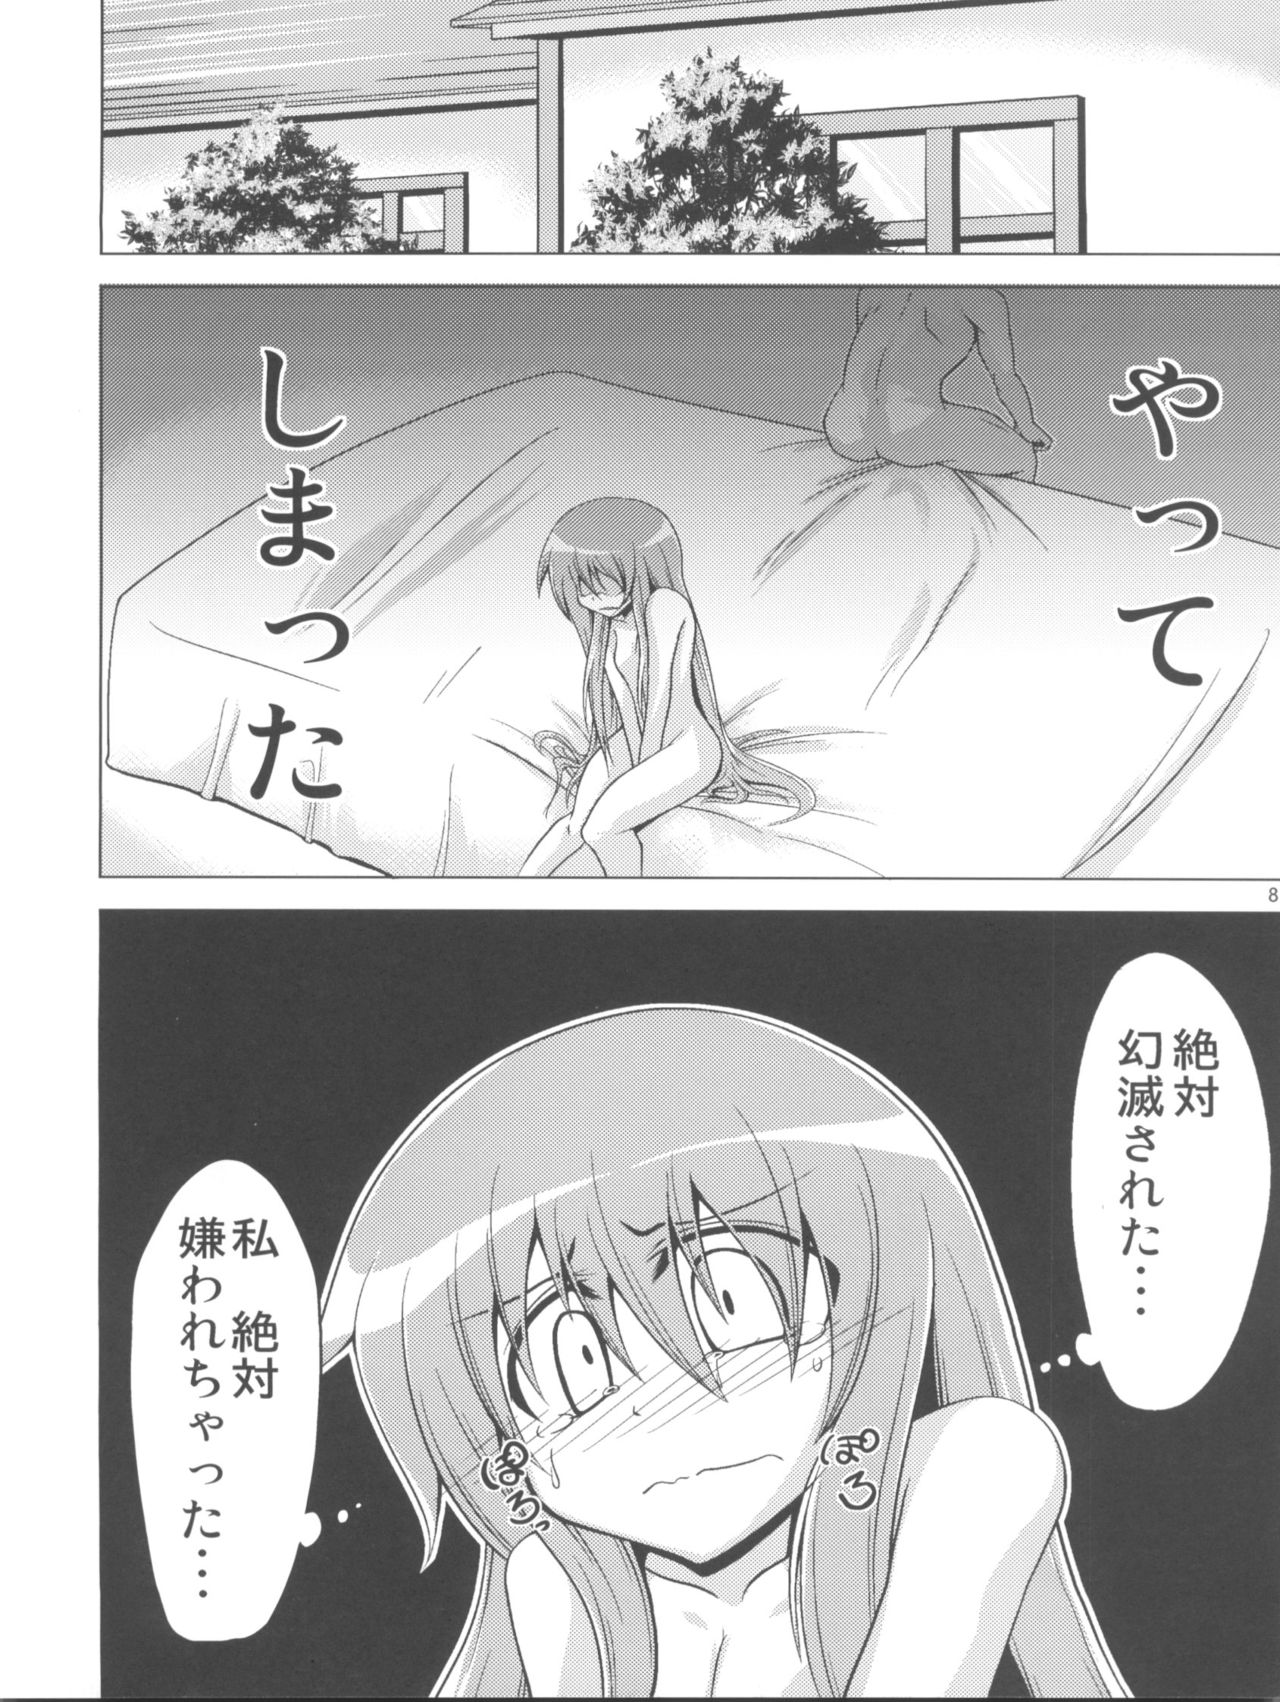 (COMIC1☆4) [Forever and ever... (Eisen)] Half Love Tenshi (Touhou Project) (COMIC1☆4) [Forever and ever... (英戦)] Half Love 天子 (東方Project)